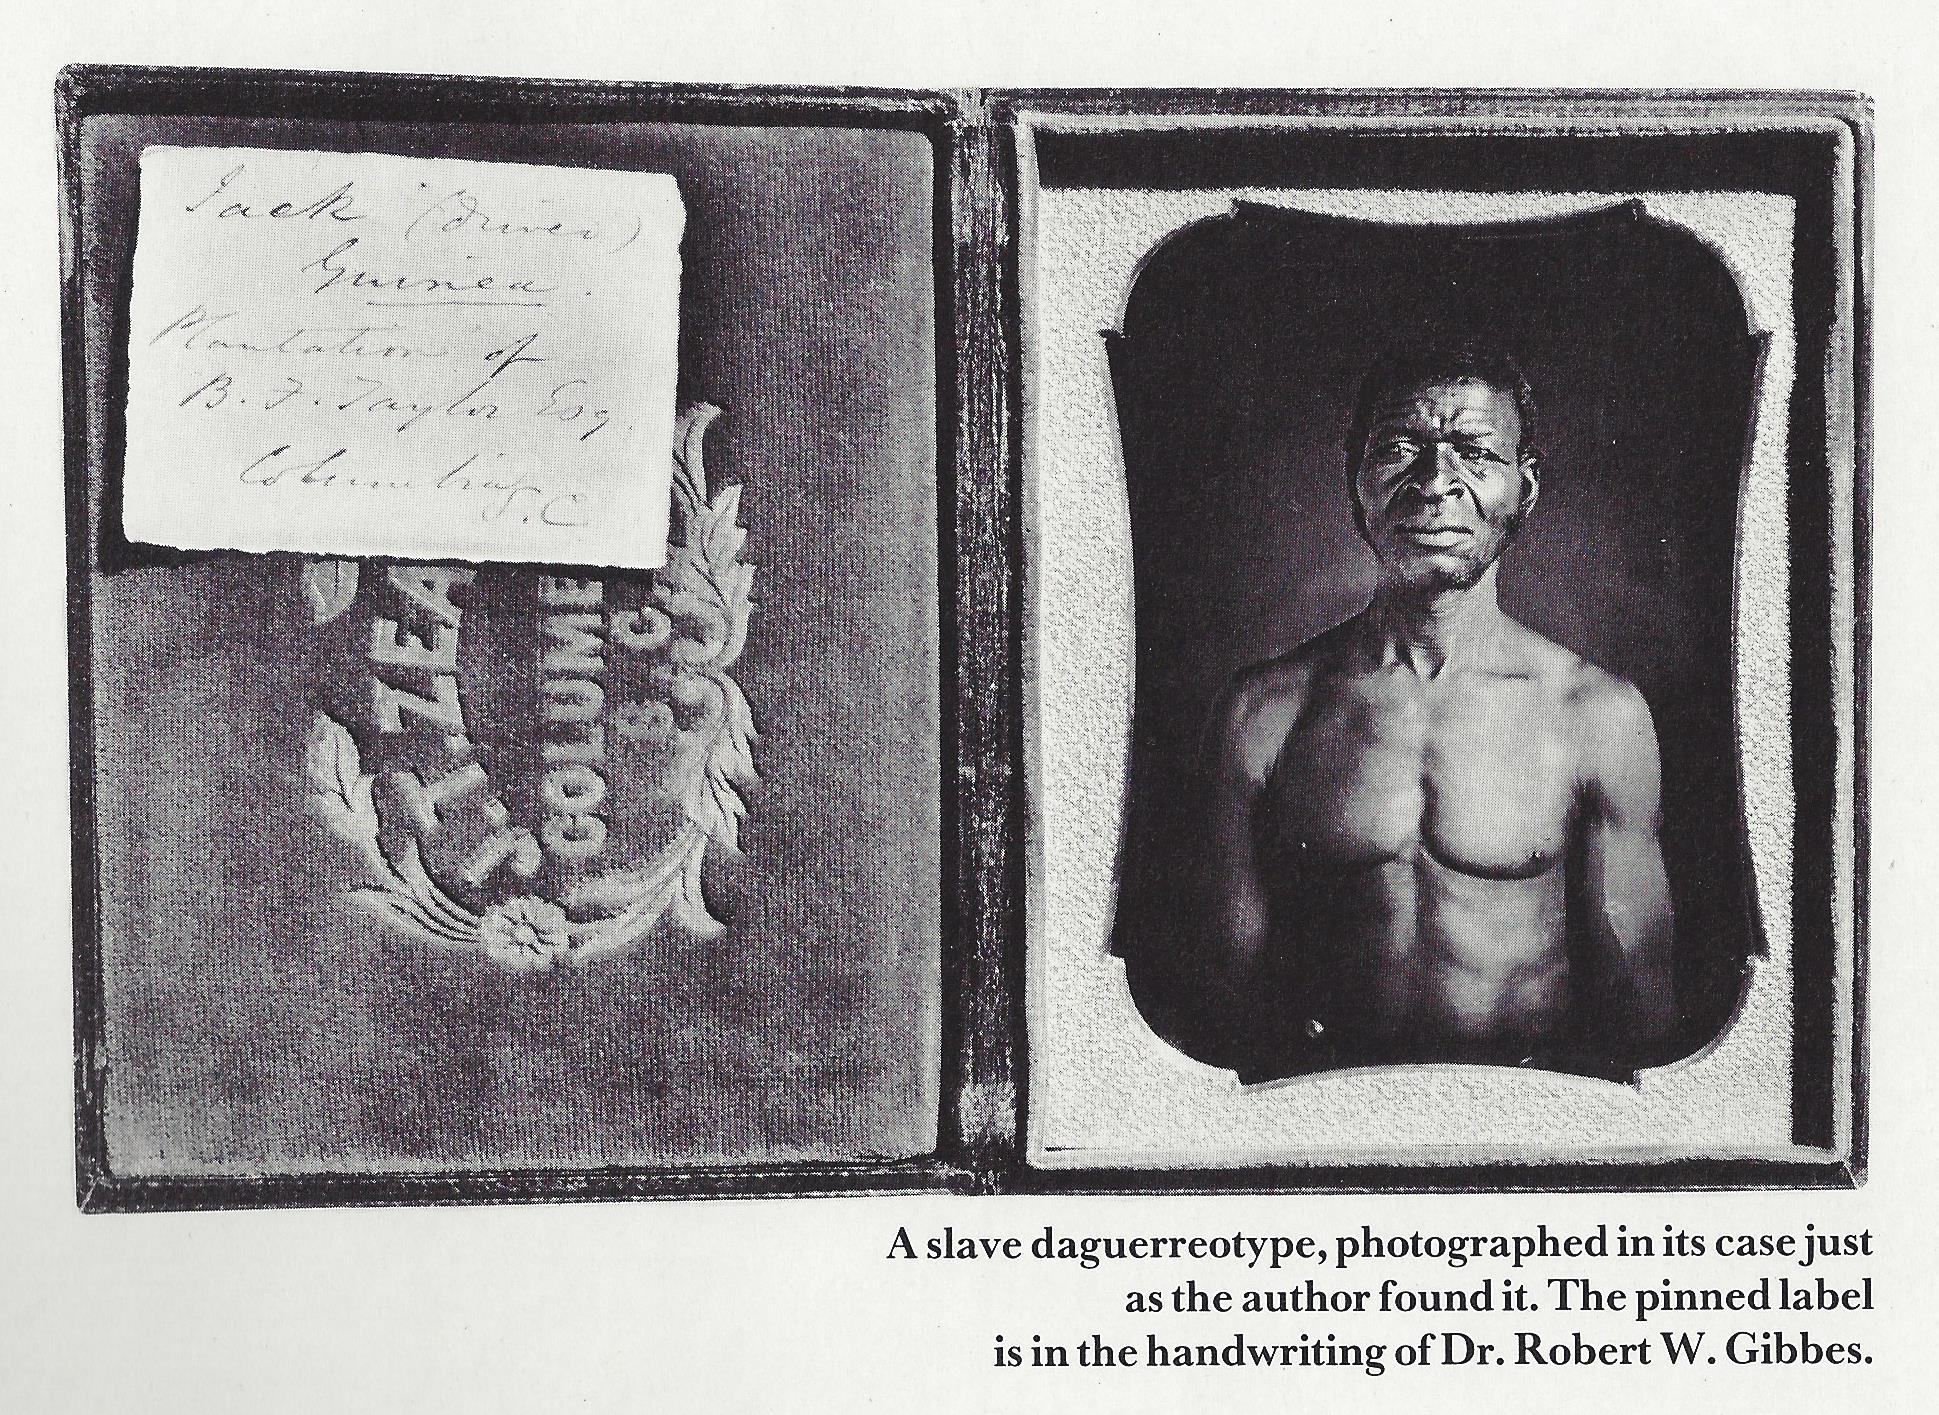 A slave daguerrotype, photographedin its case just as the author found it. The pinned label is in the handwriting of Dr. Robert W. Gibbes.